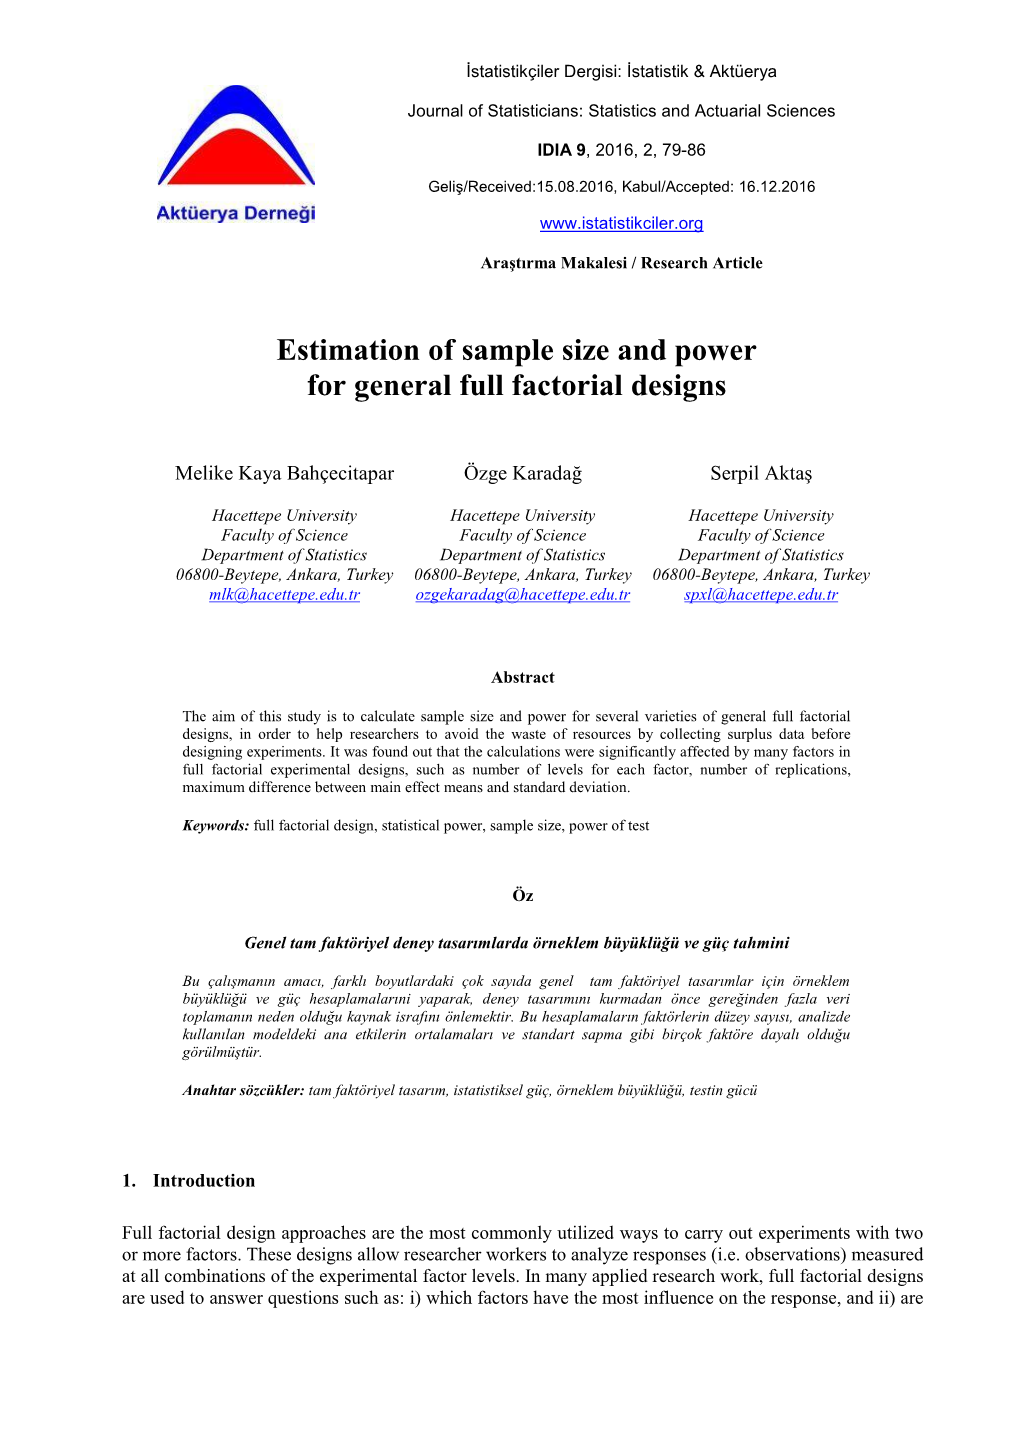 Estimation of Sample Size and Power for General Full Factorial Designs